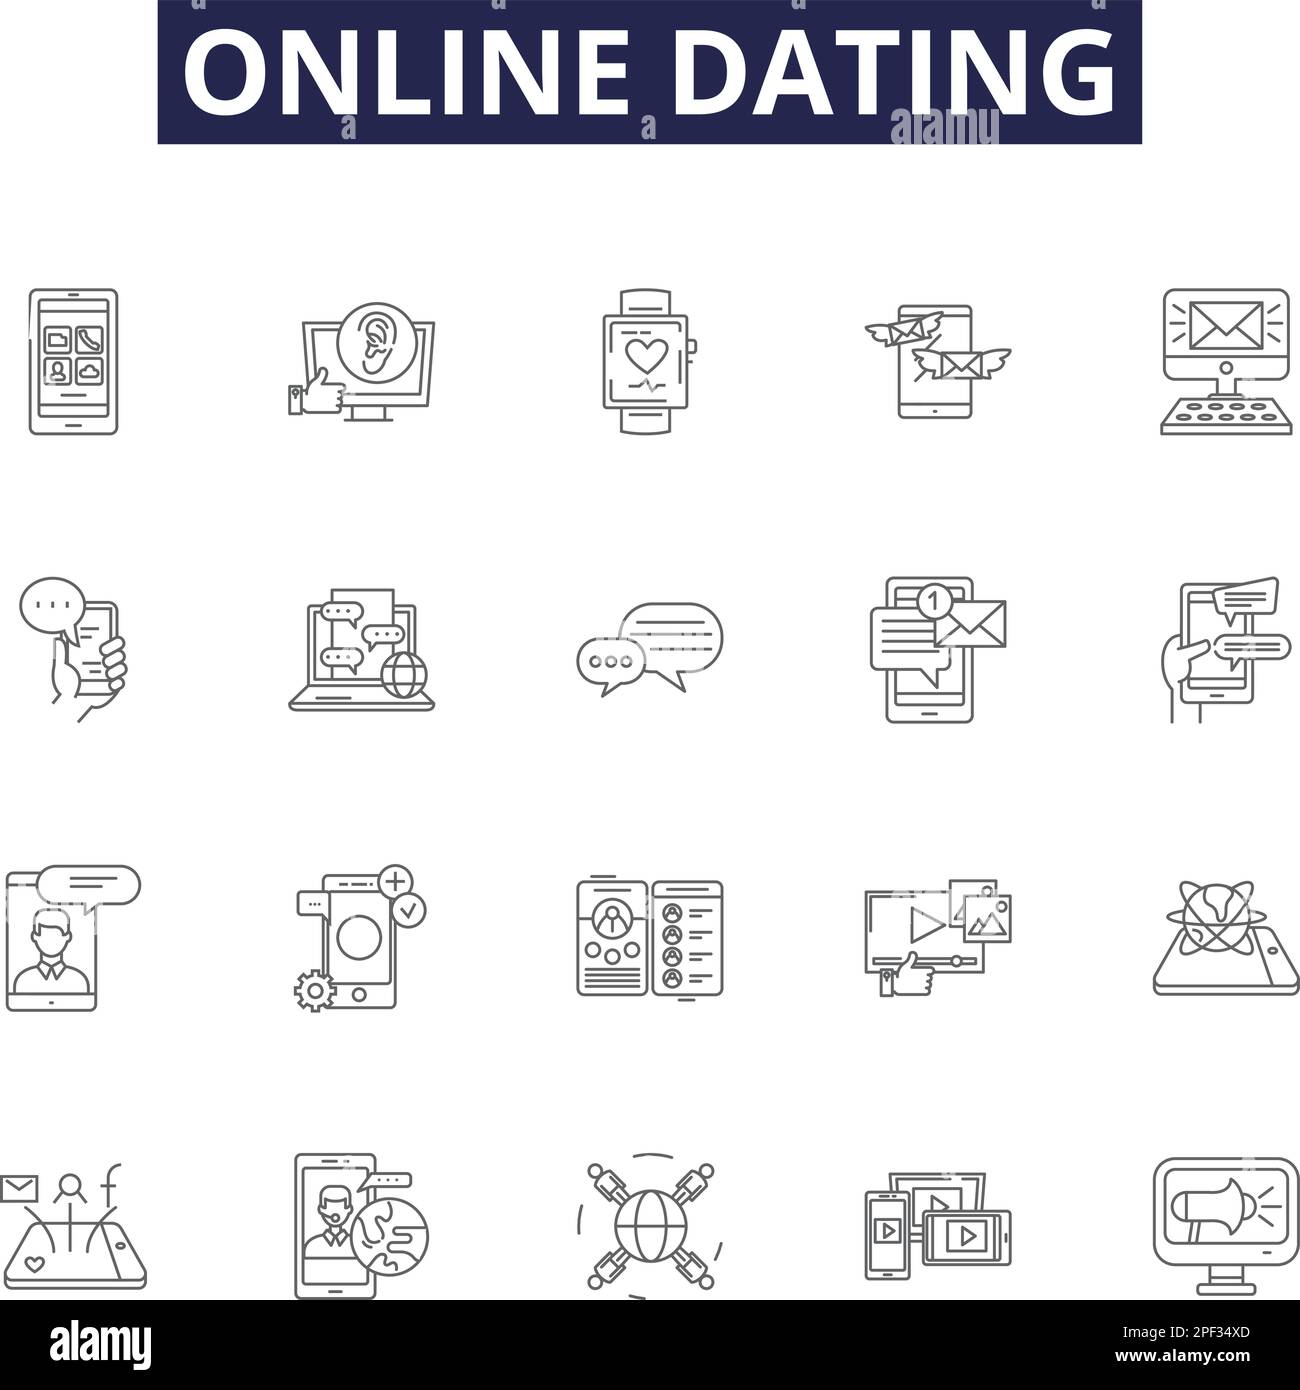 Online dating line vector icons and signs. Online, Matchmaking, Singles, Romance, Relationships, Soulmates, Love, Interaction outline vector Stock Vector